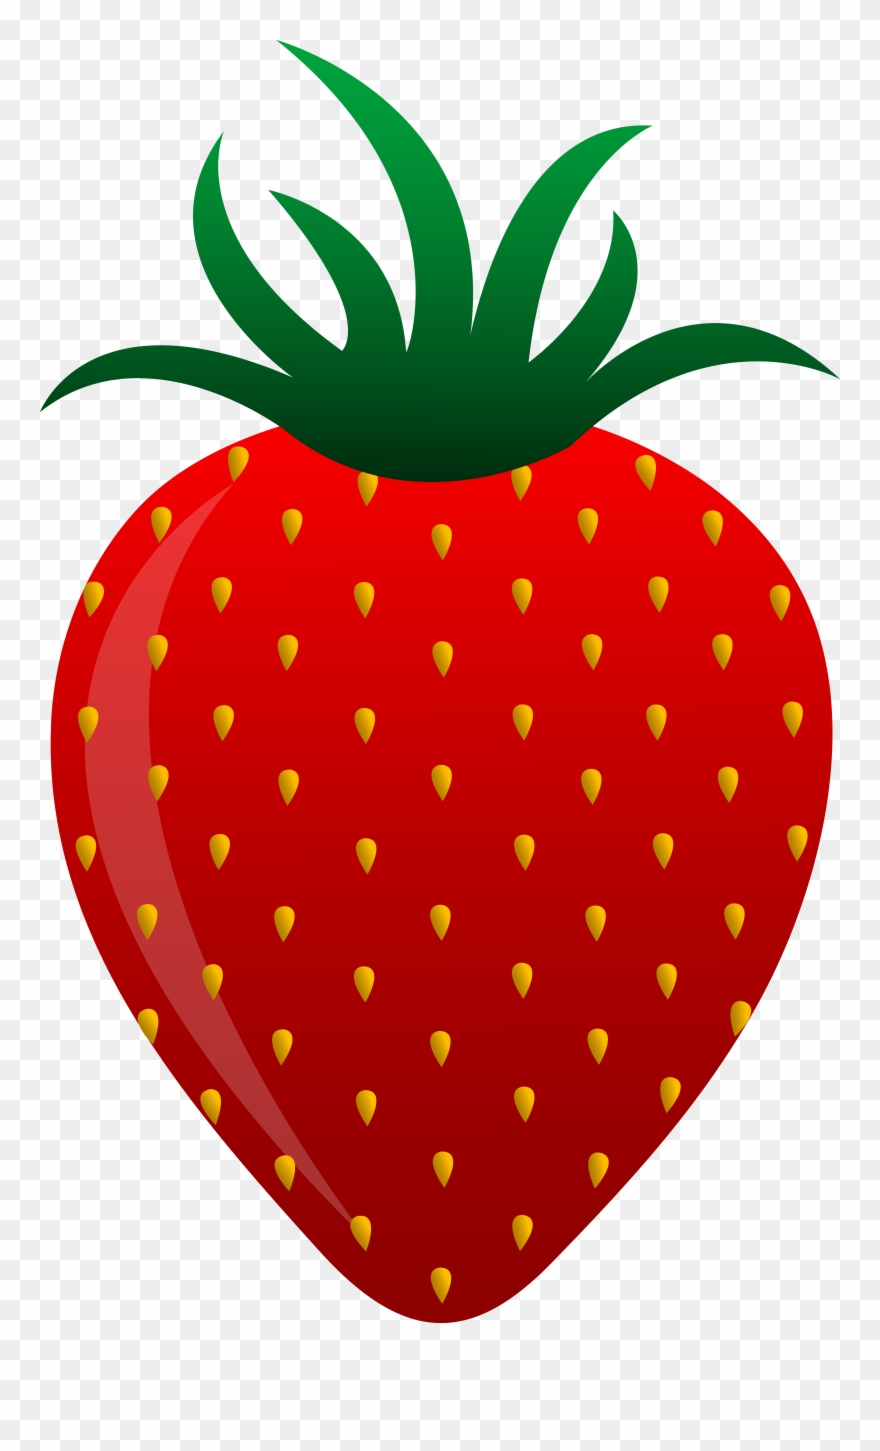 Red Fruits And Vegetables Clipart